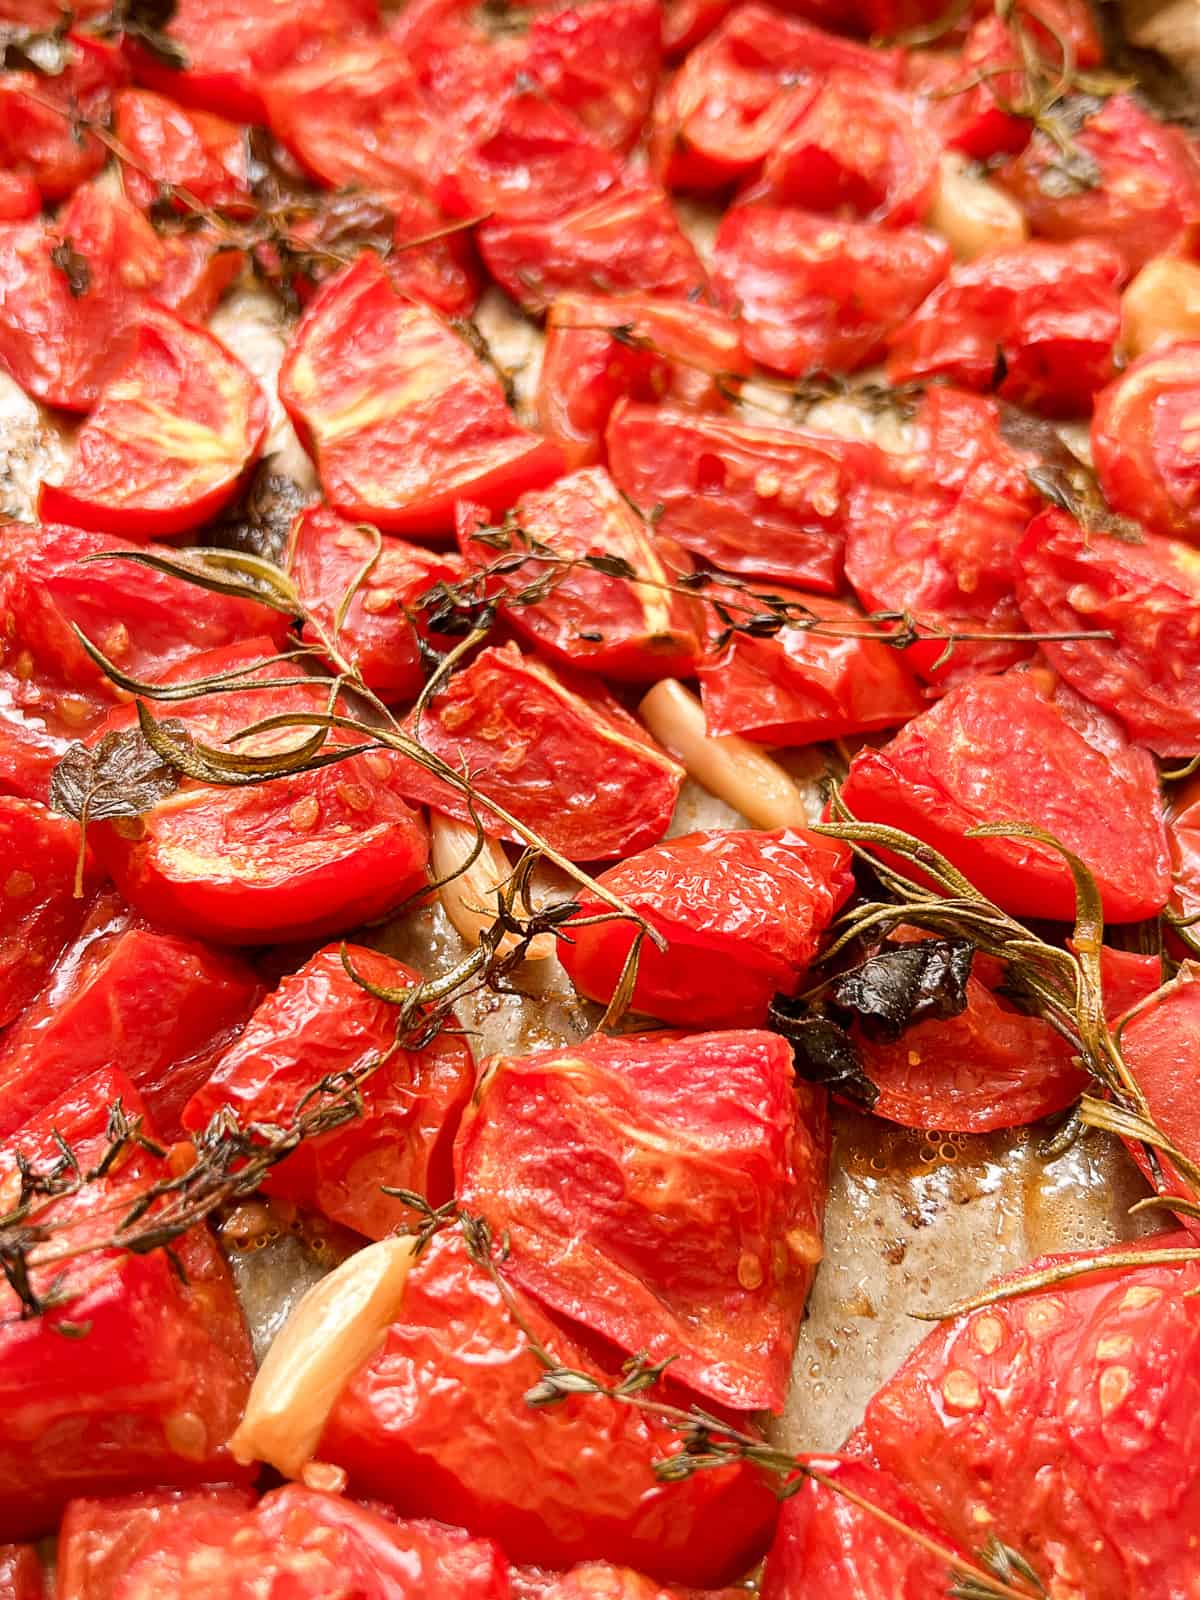 A close up image of Oven Roasted Tomatoes.